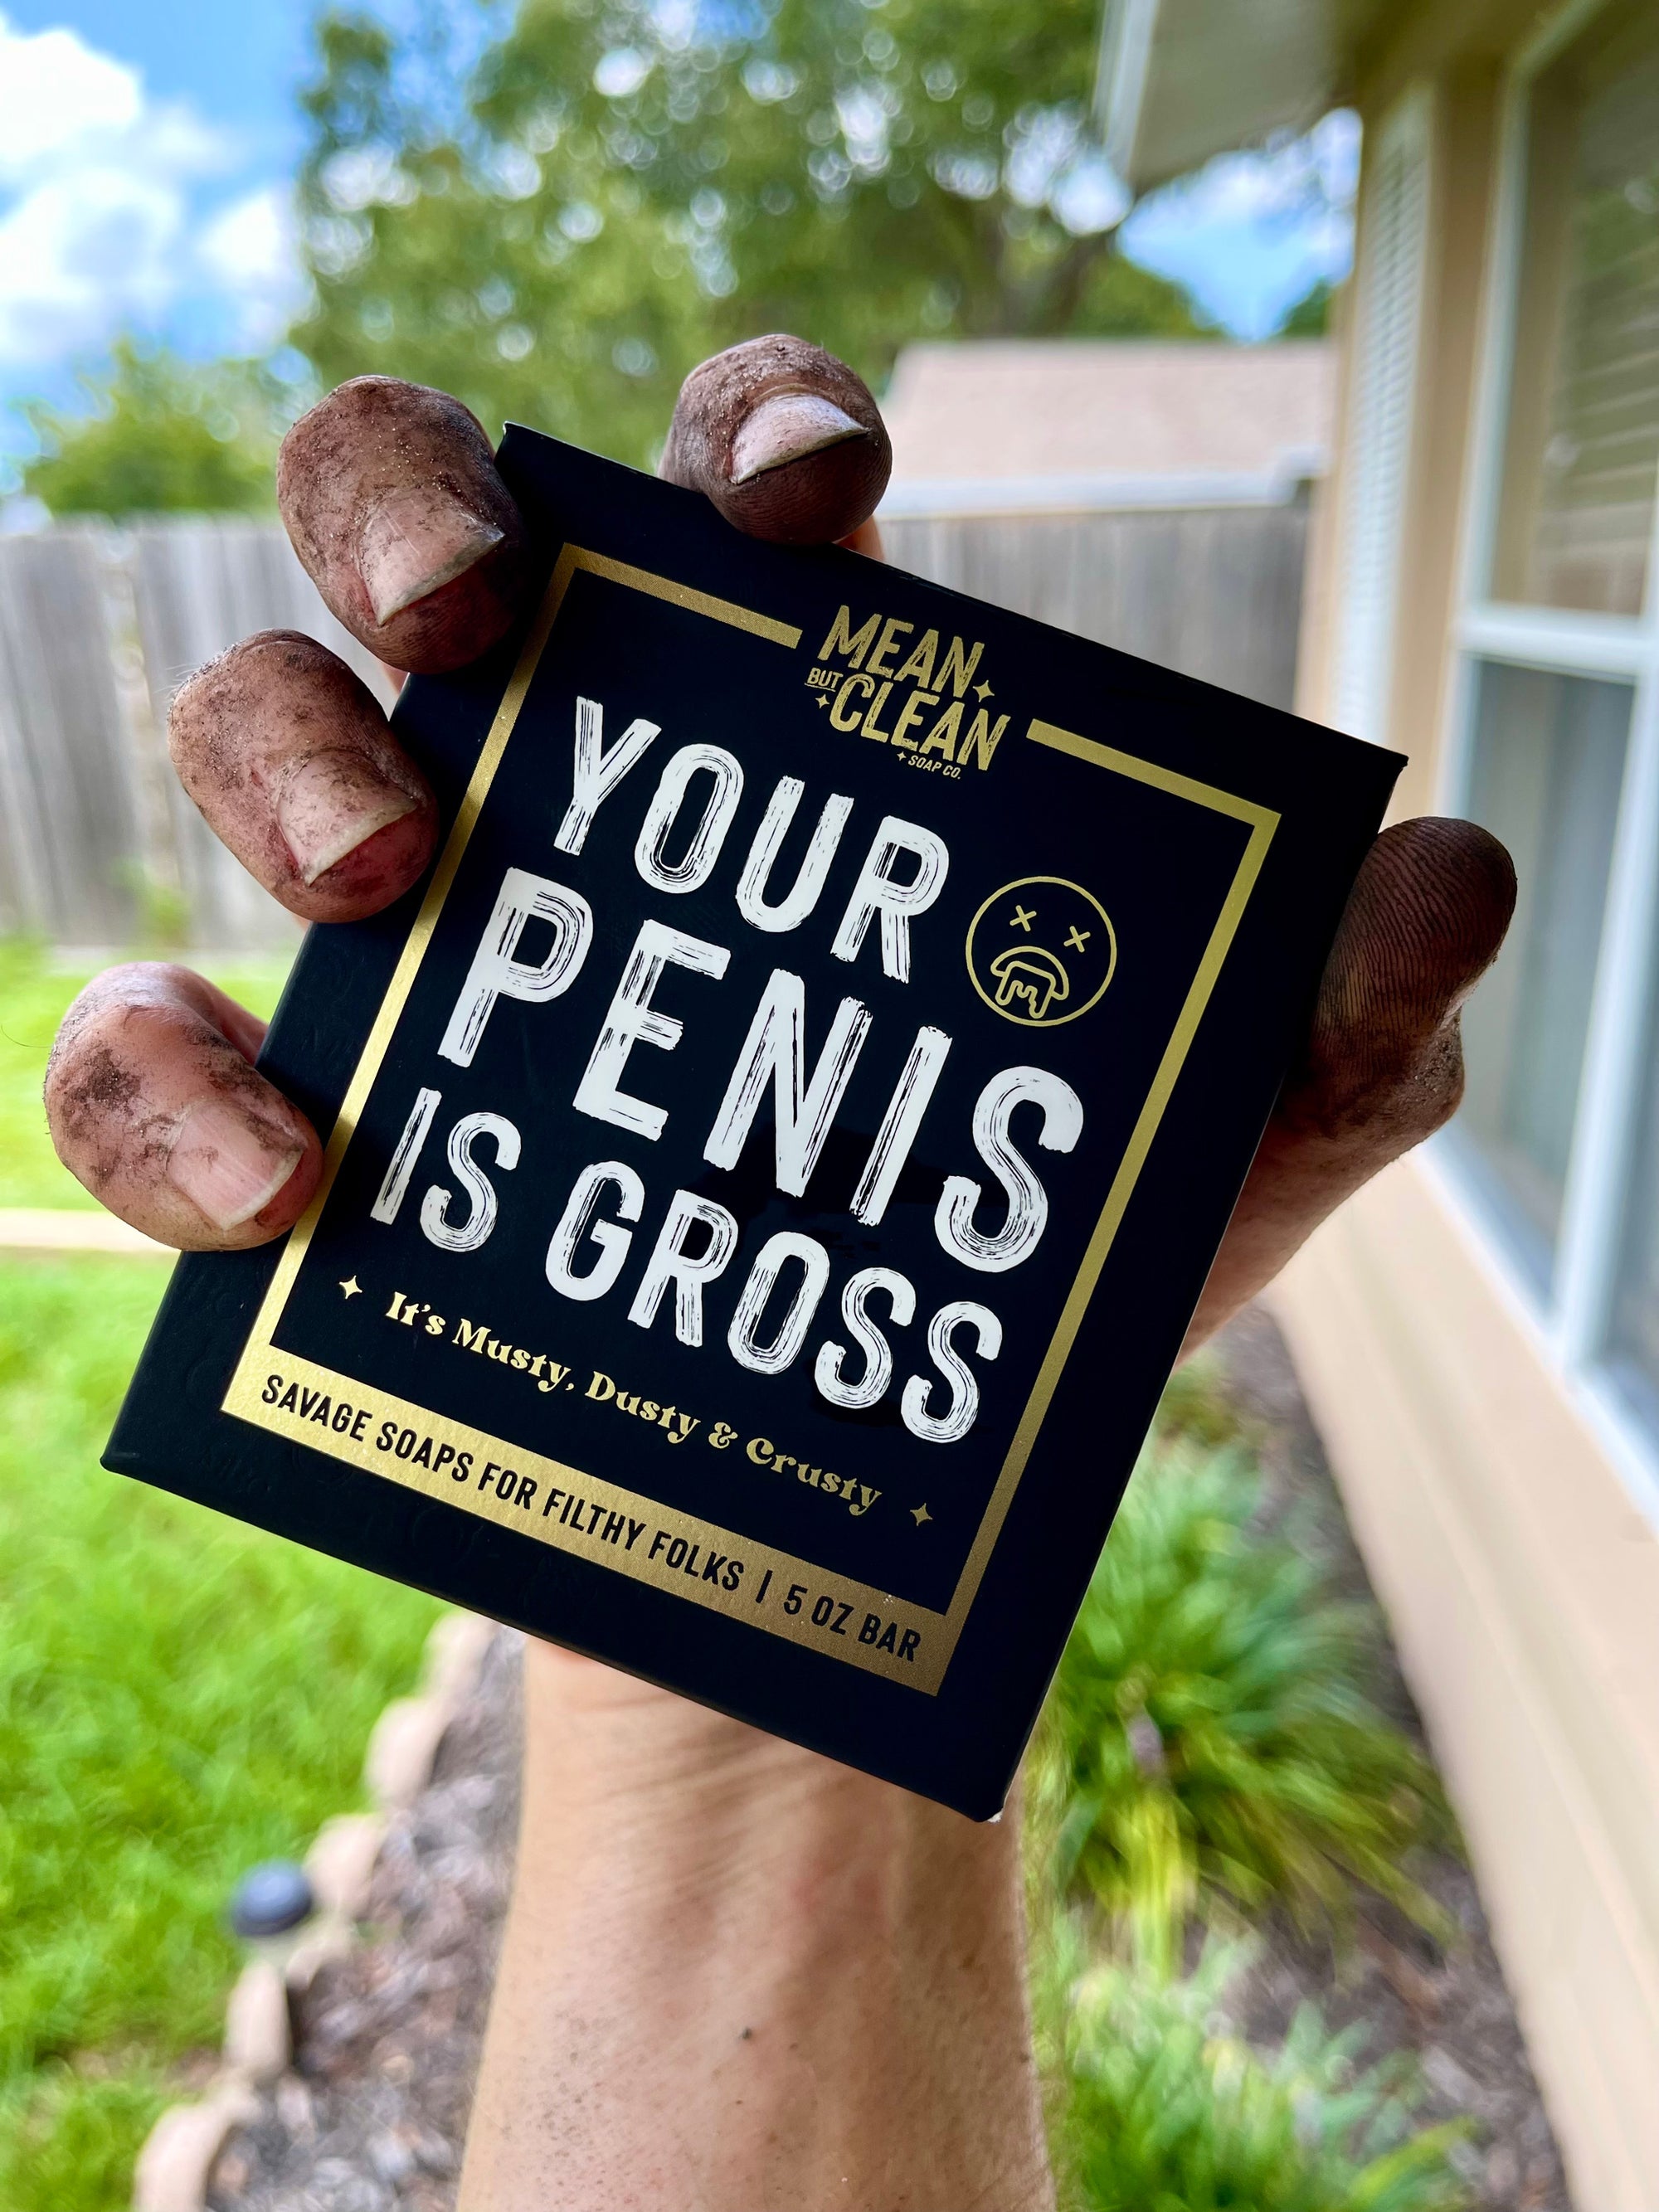 Your Penis Is Gross - Orange Pine Tar Soap - Natural Handmade Soap - Funny Gag Gift For Friends - Savage Soaps For Filthy Folks